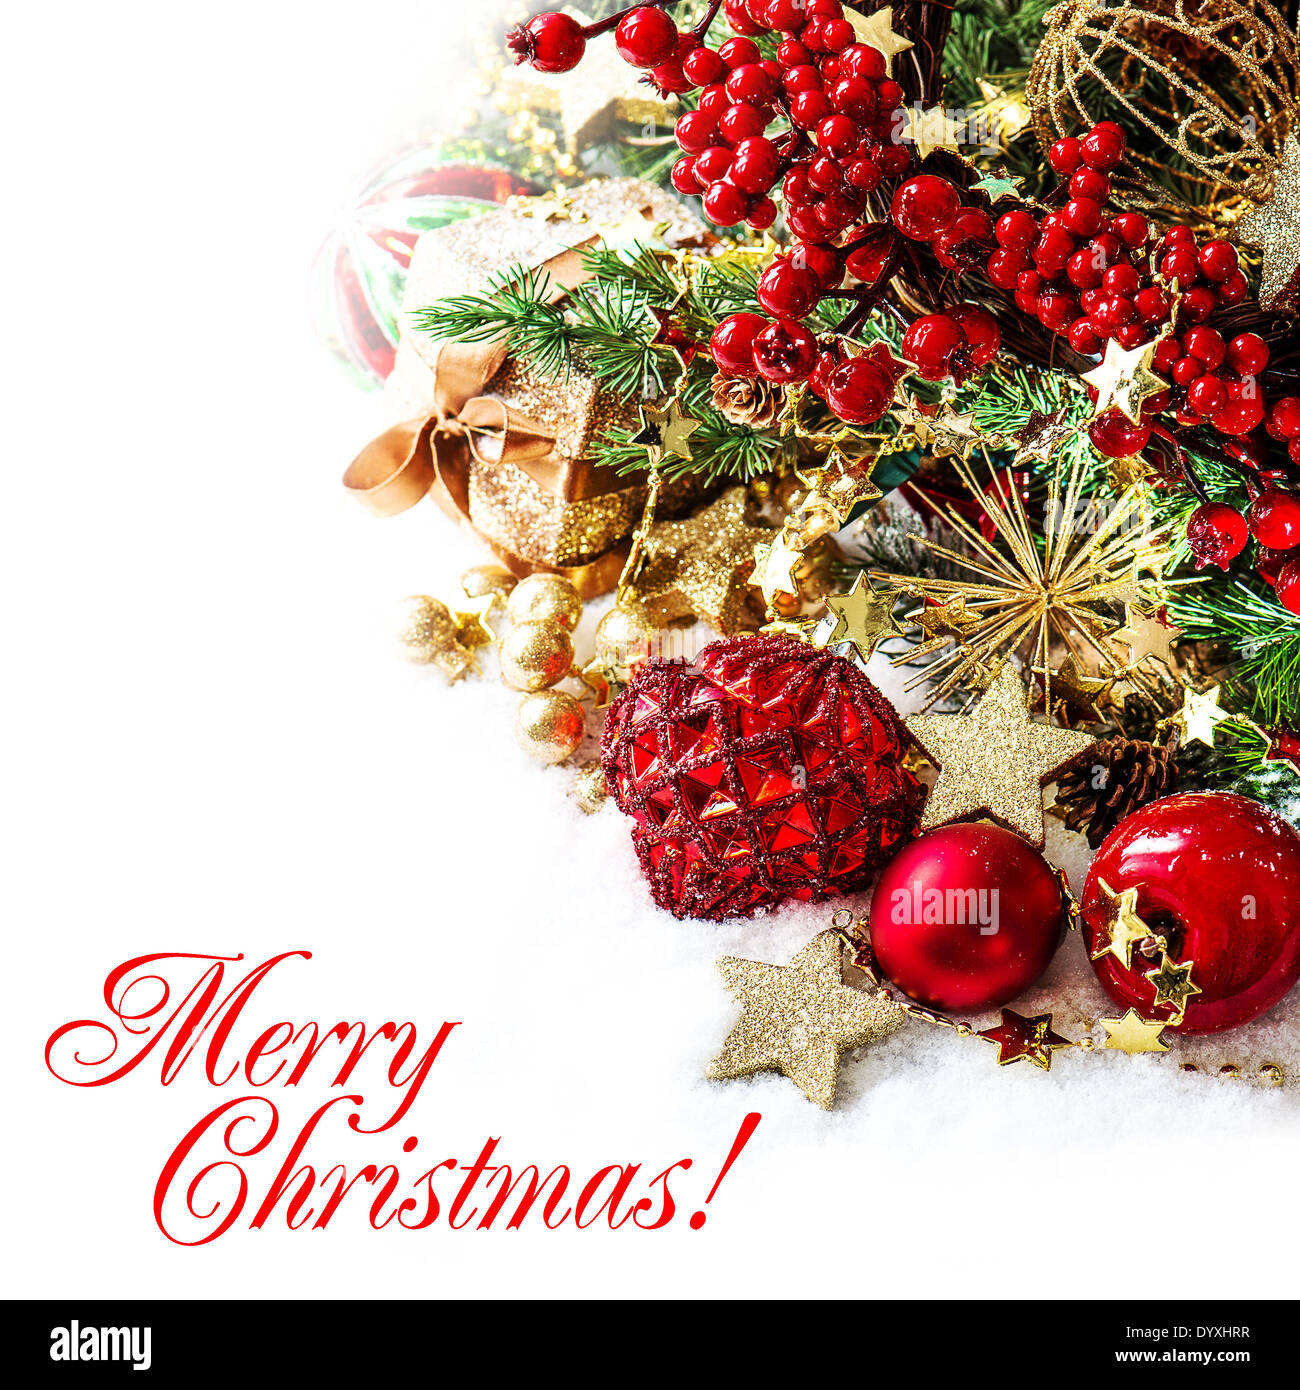 festive decoration with baubles, golden garlands, christmas tree and red berries. Stock Photo